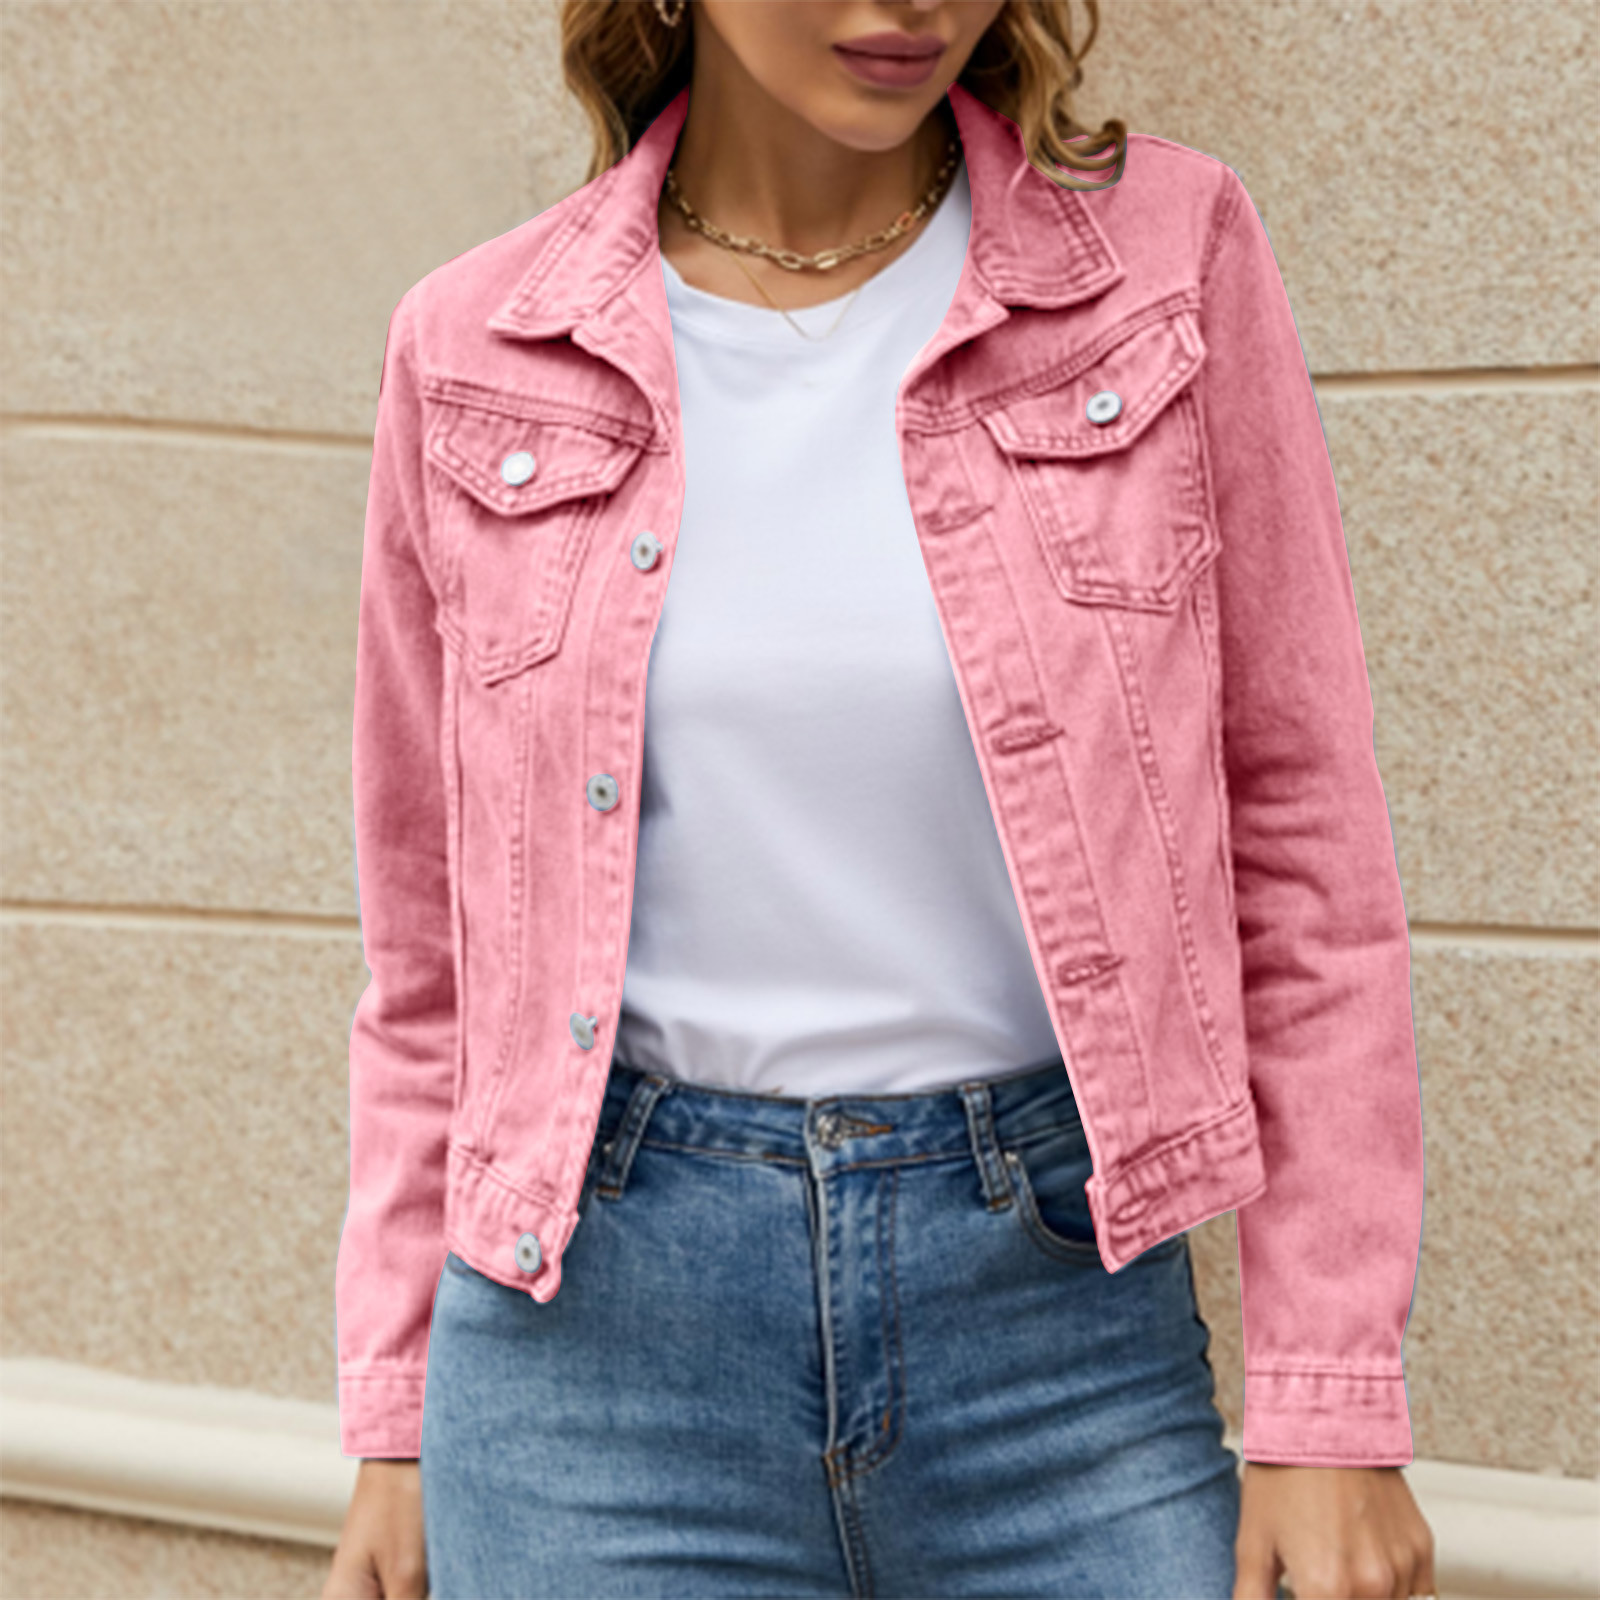 iOPQO womens sweaters Women's Basic Solid Color Button Down Denim Cotton Jacket With Pockets Denim Jacket Coat Women's Denim Jackets Pink S - image 5 of 9